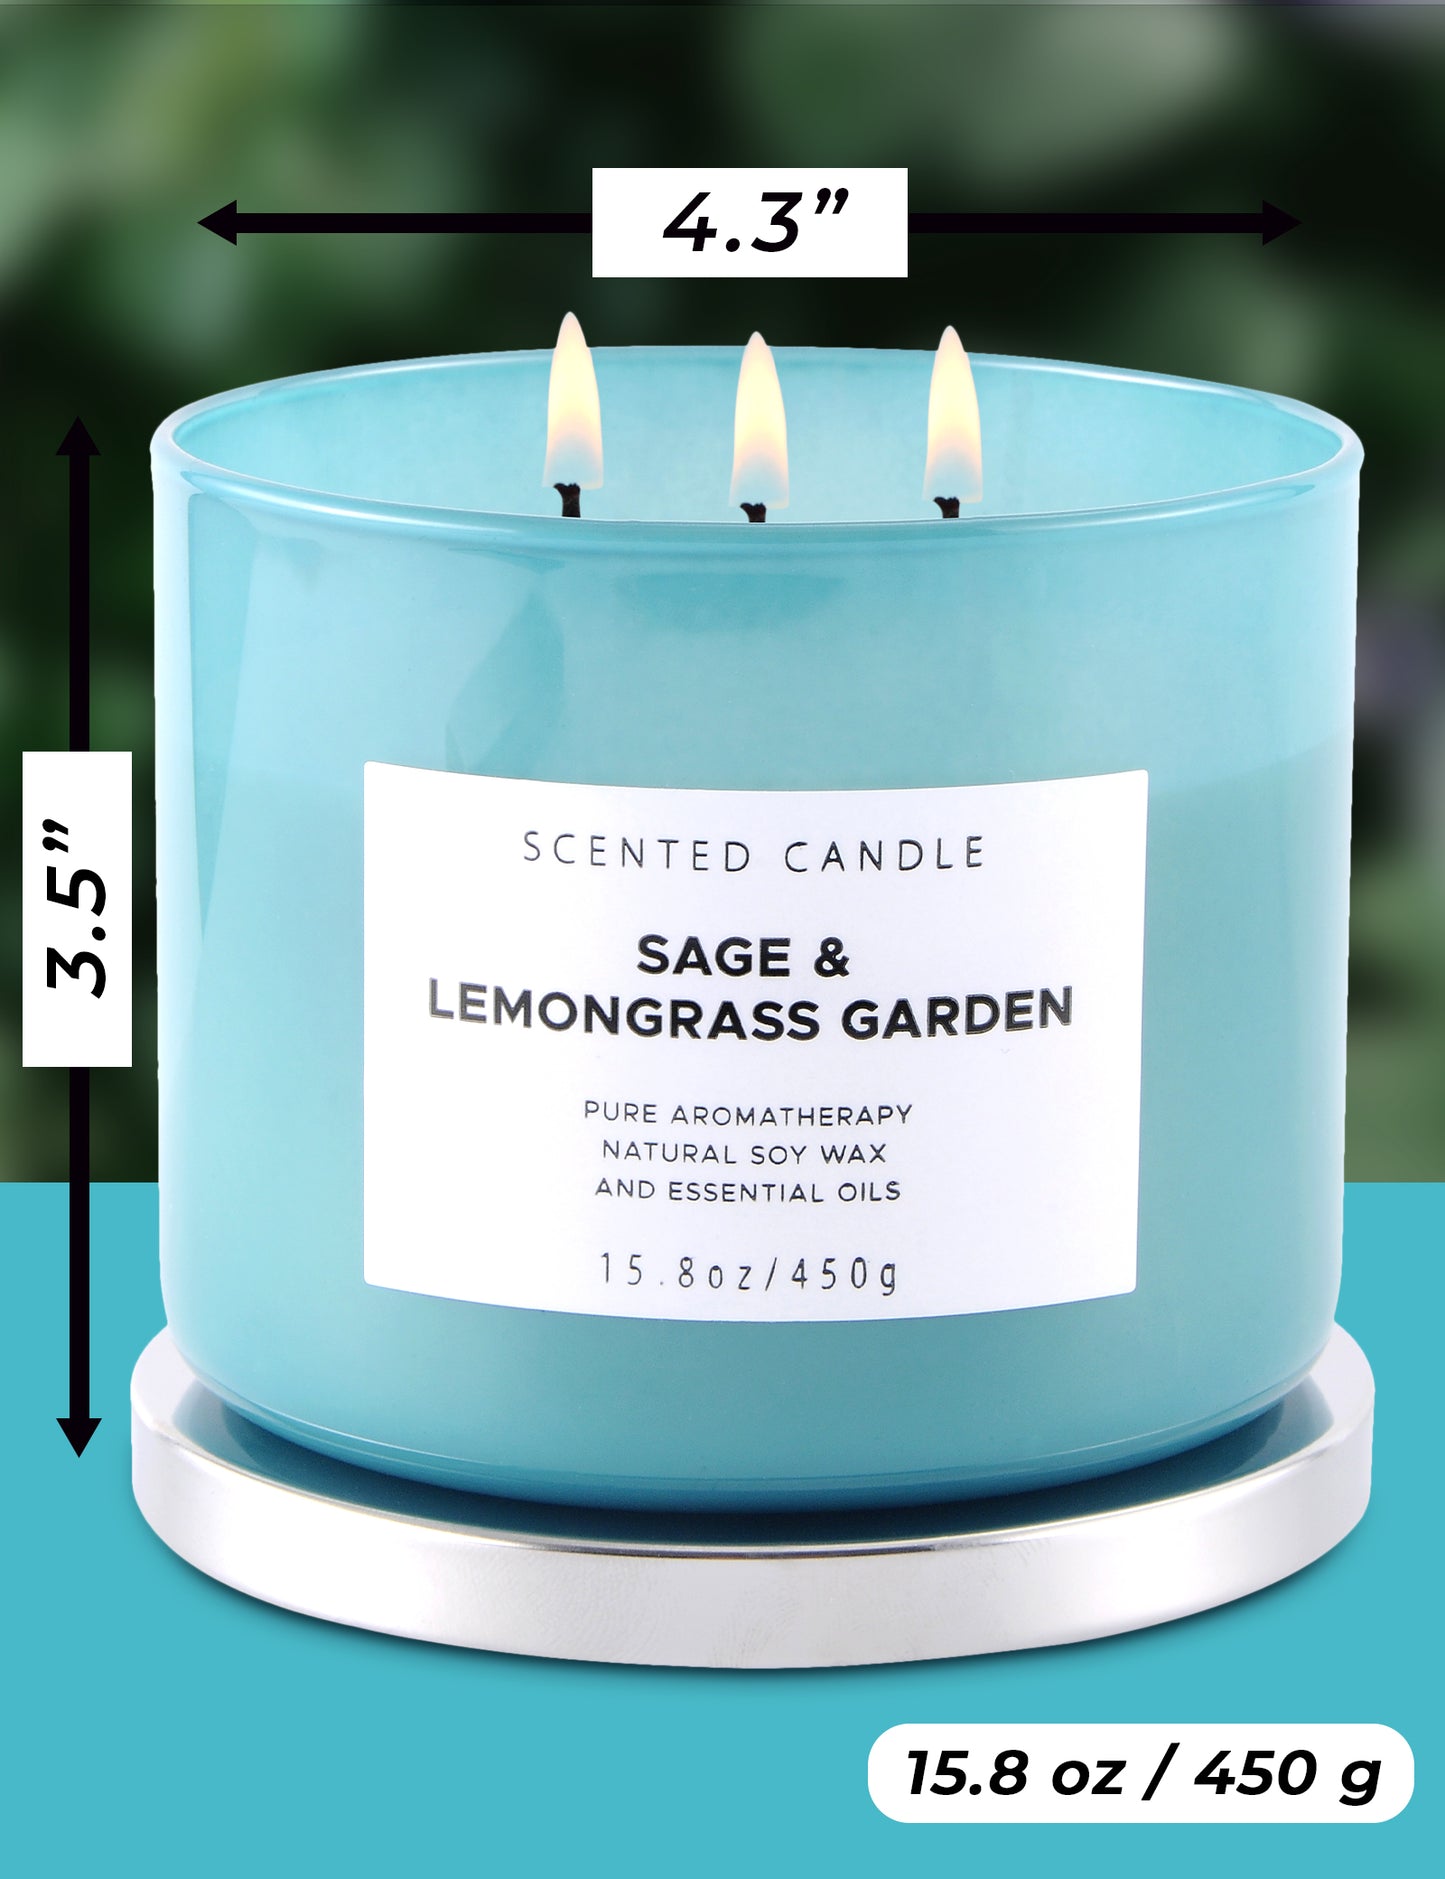 Sage & Lemongrass Garden Scented Soy Candle 3-Wick